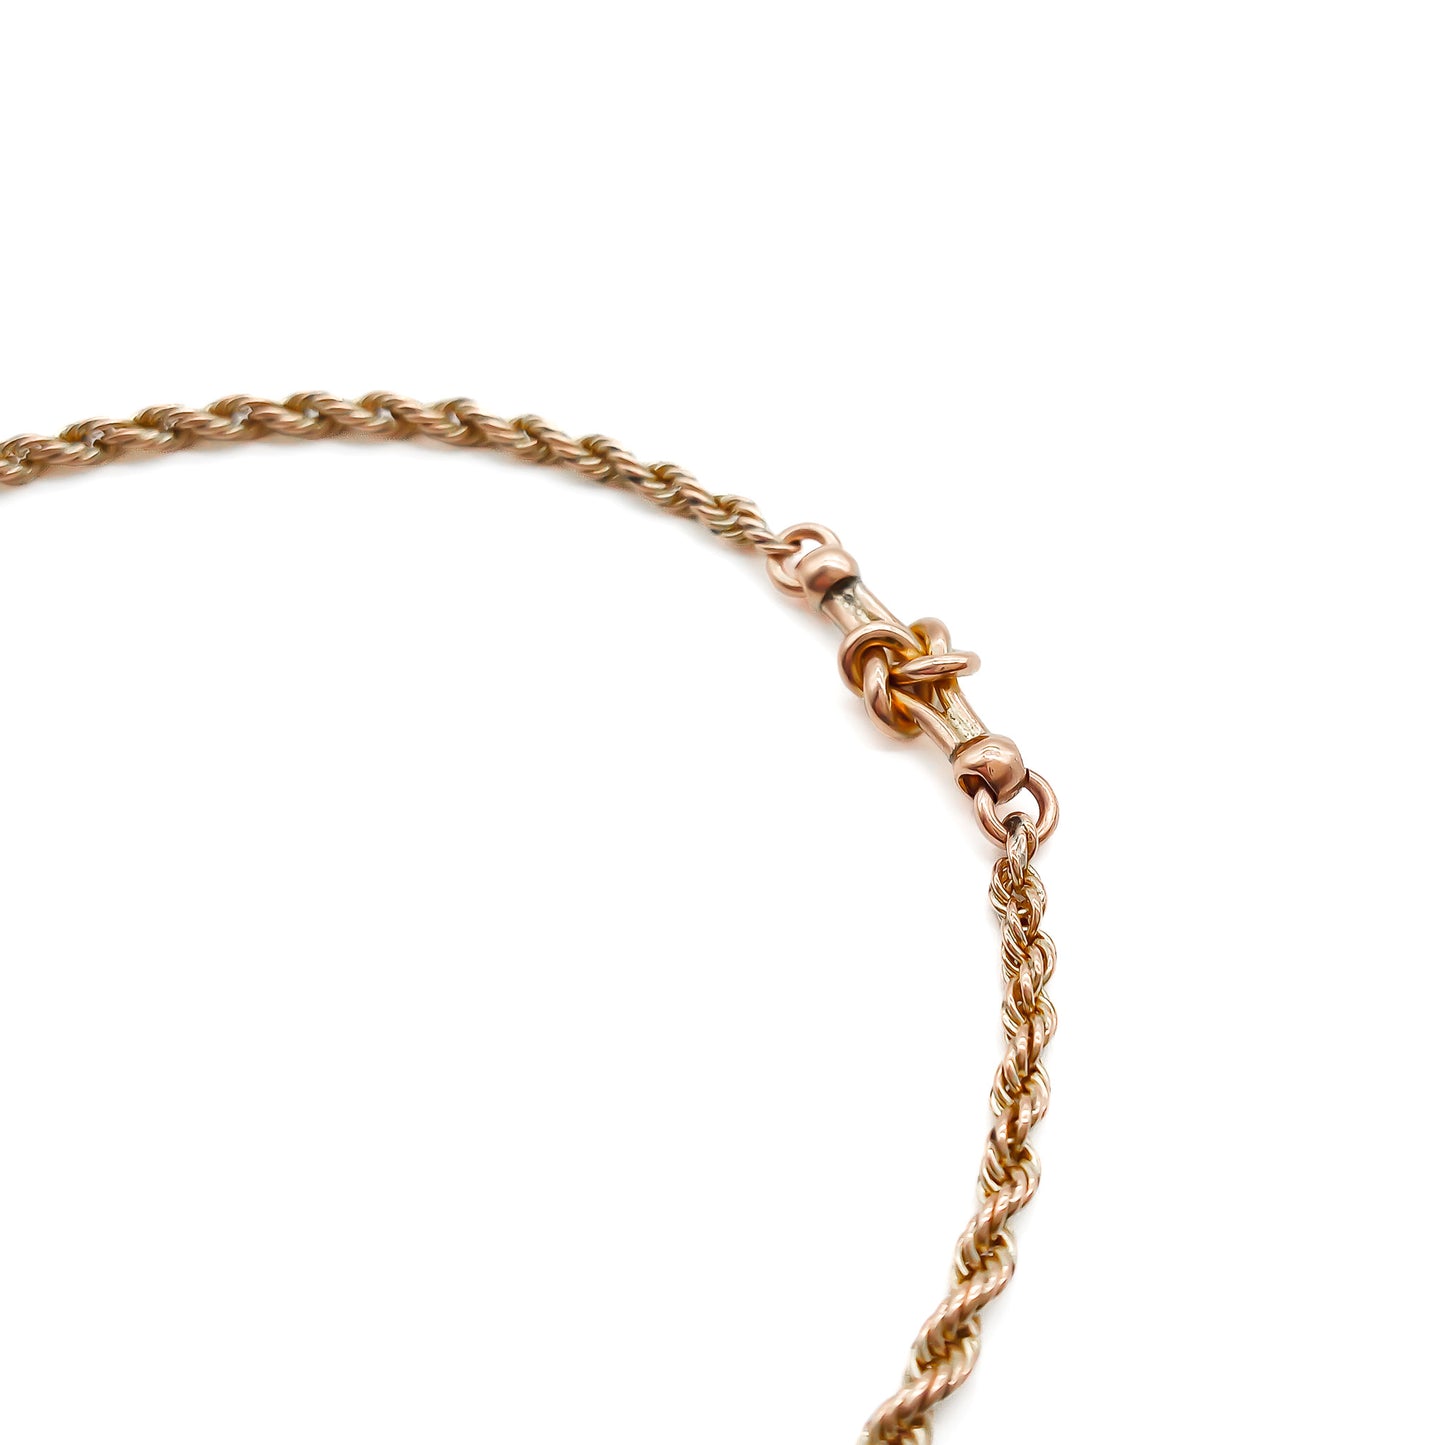 Very dainty Victorian 9ct rose gold albertina with a dog clip and T-bar.